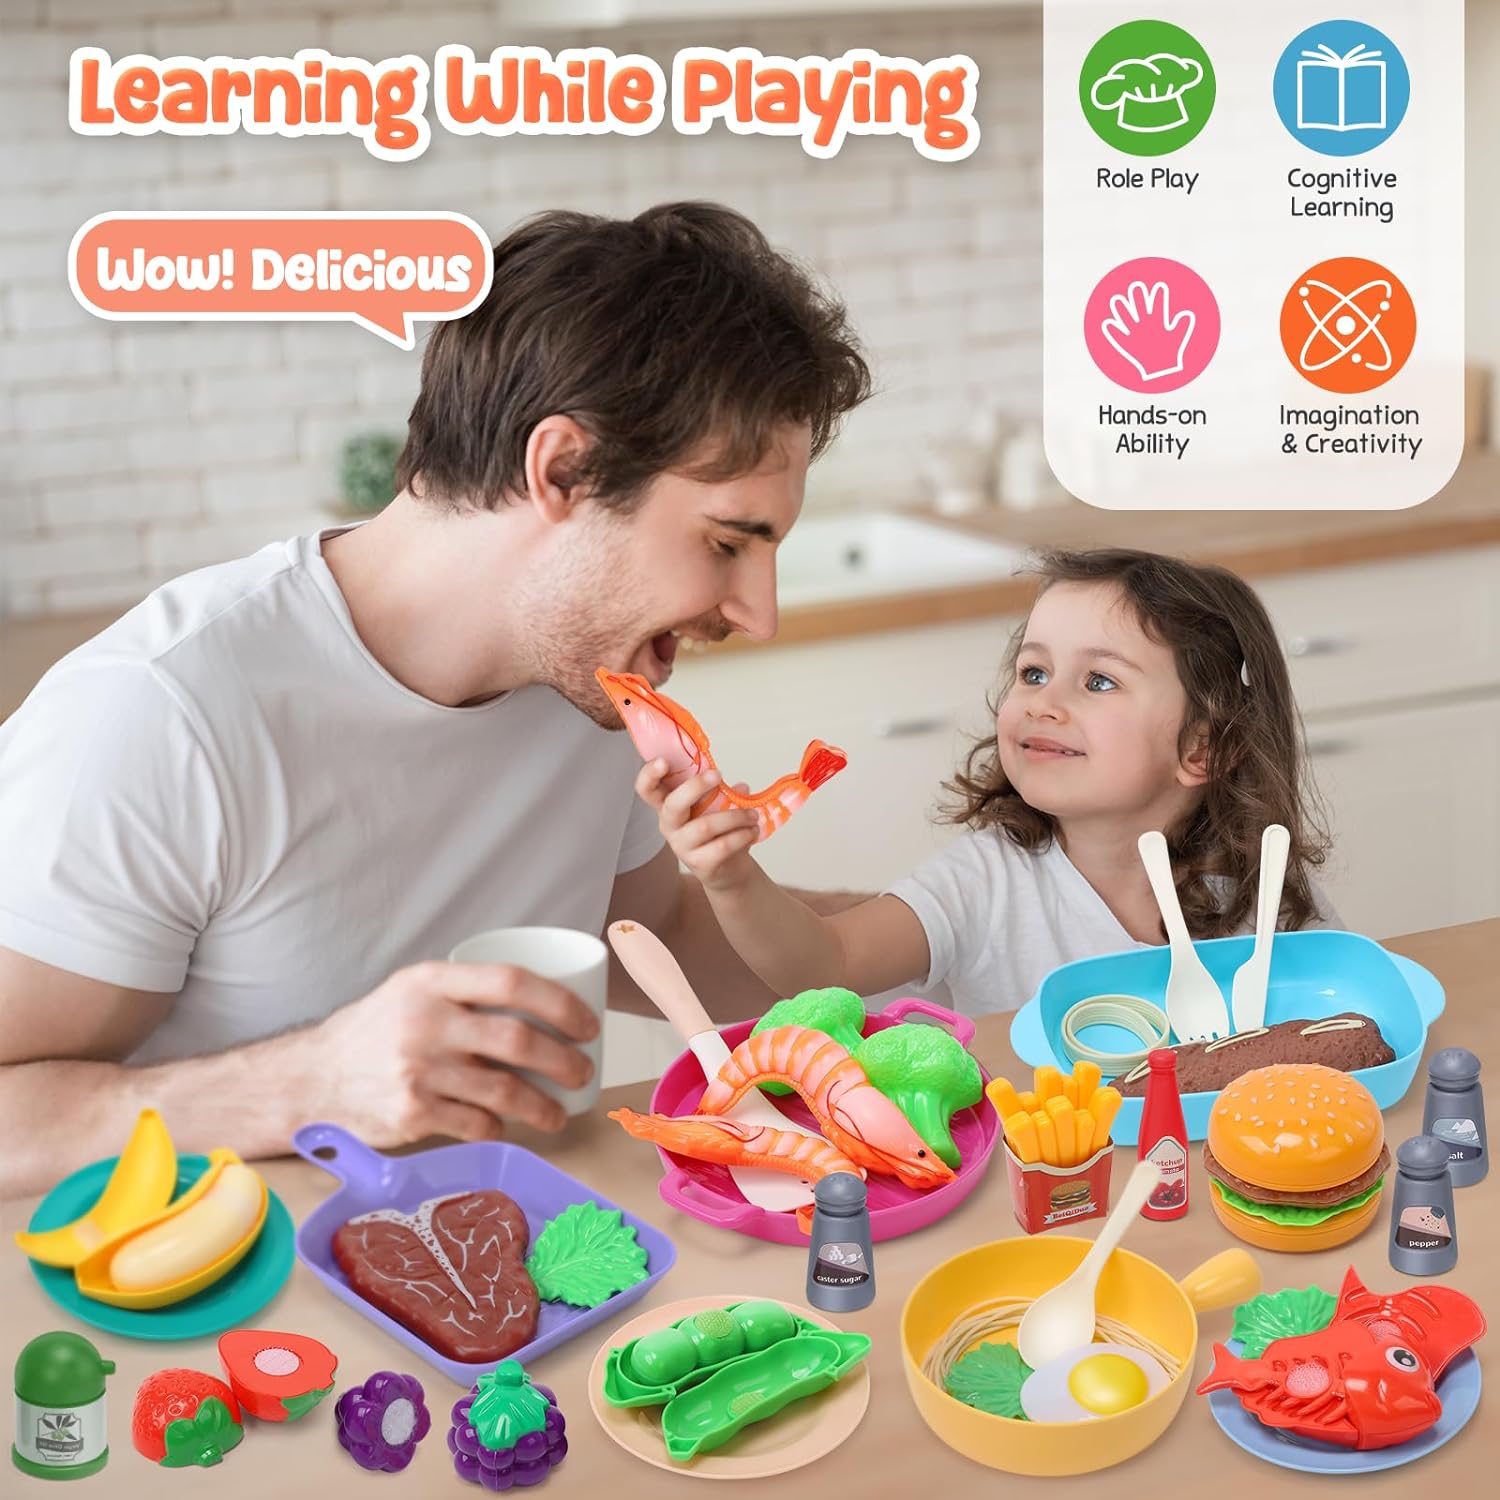 cute stone Kids Play Kitchen Toy Accessories, Toddler Pretend Cooking Playset with Toys Cookware and Utensils - Cykapu